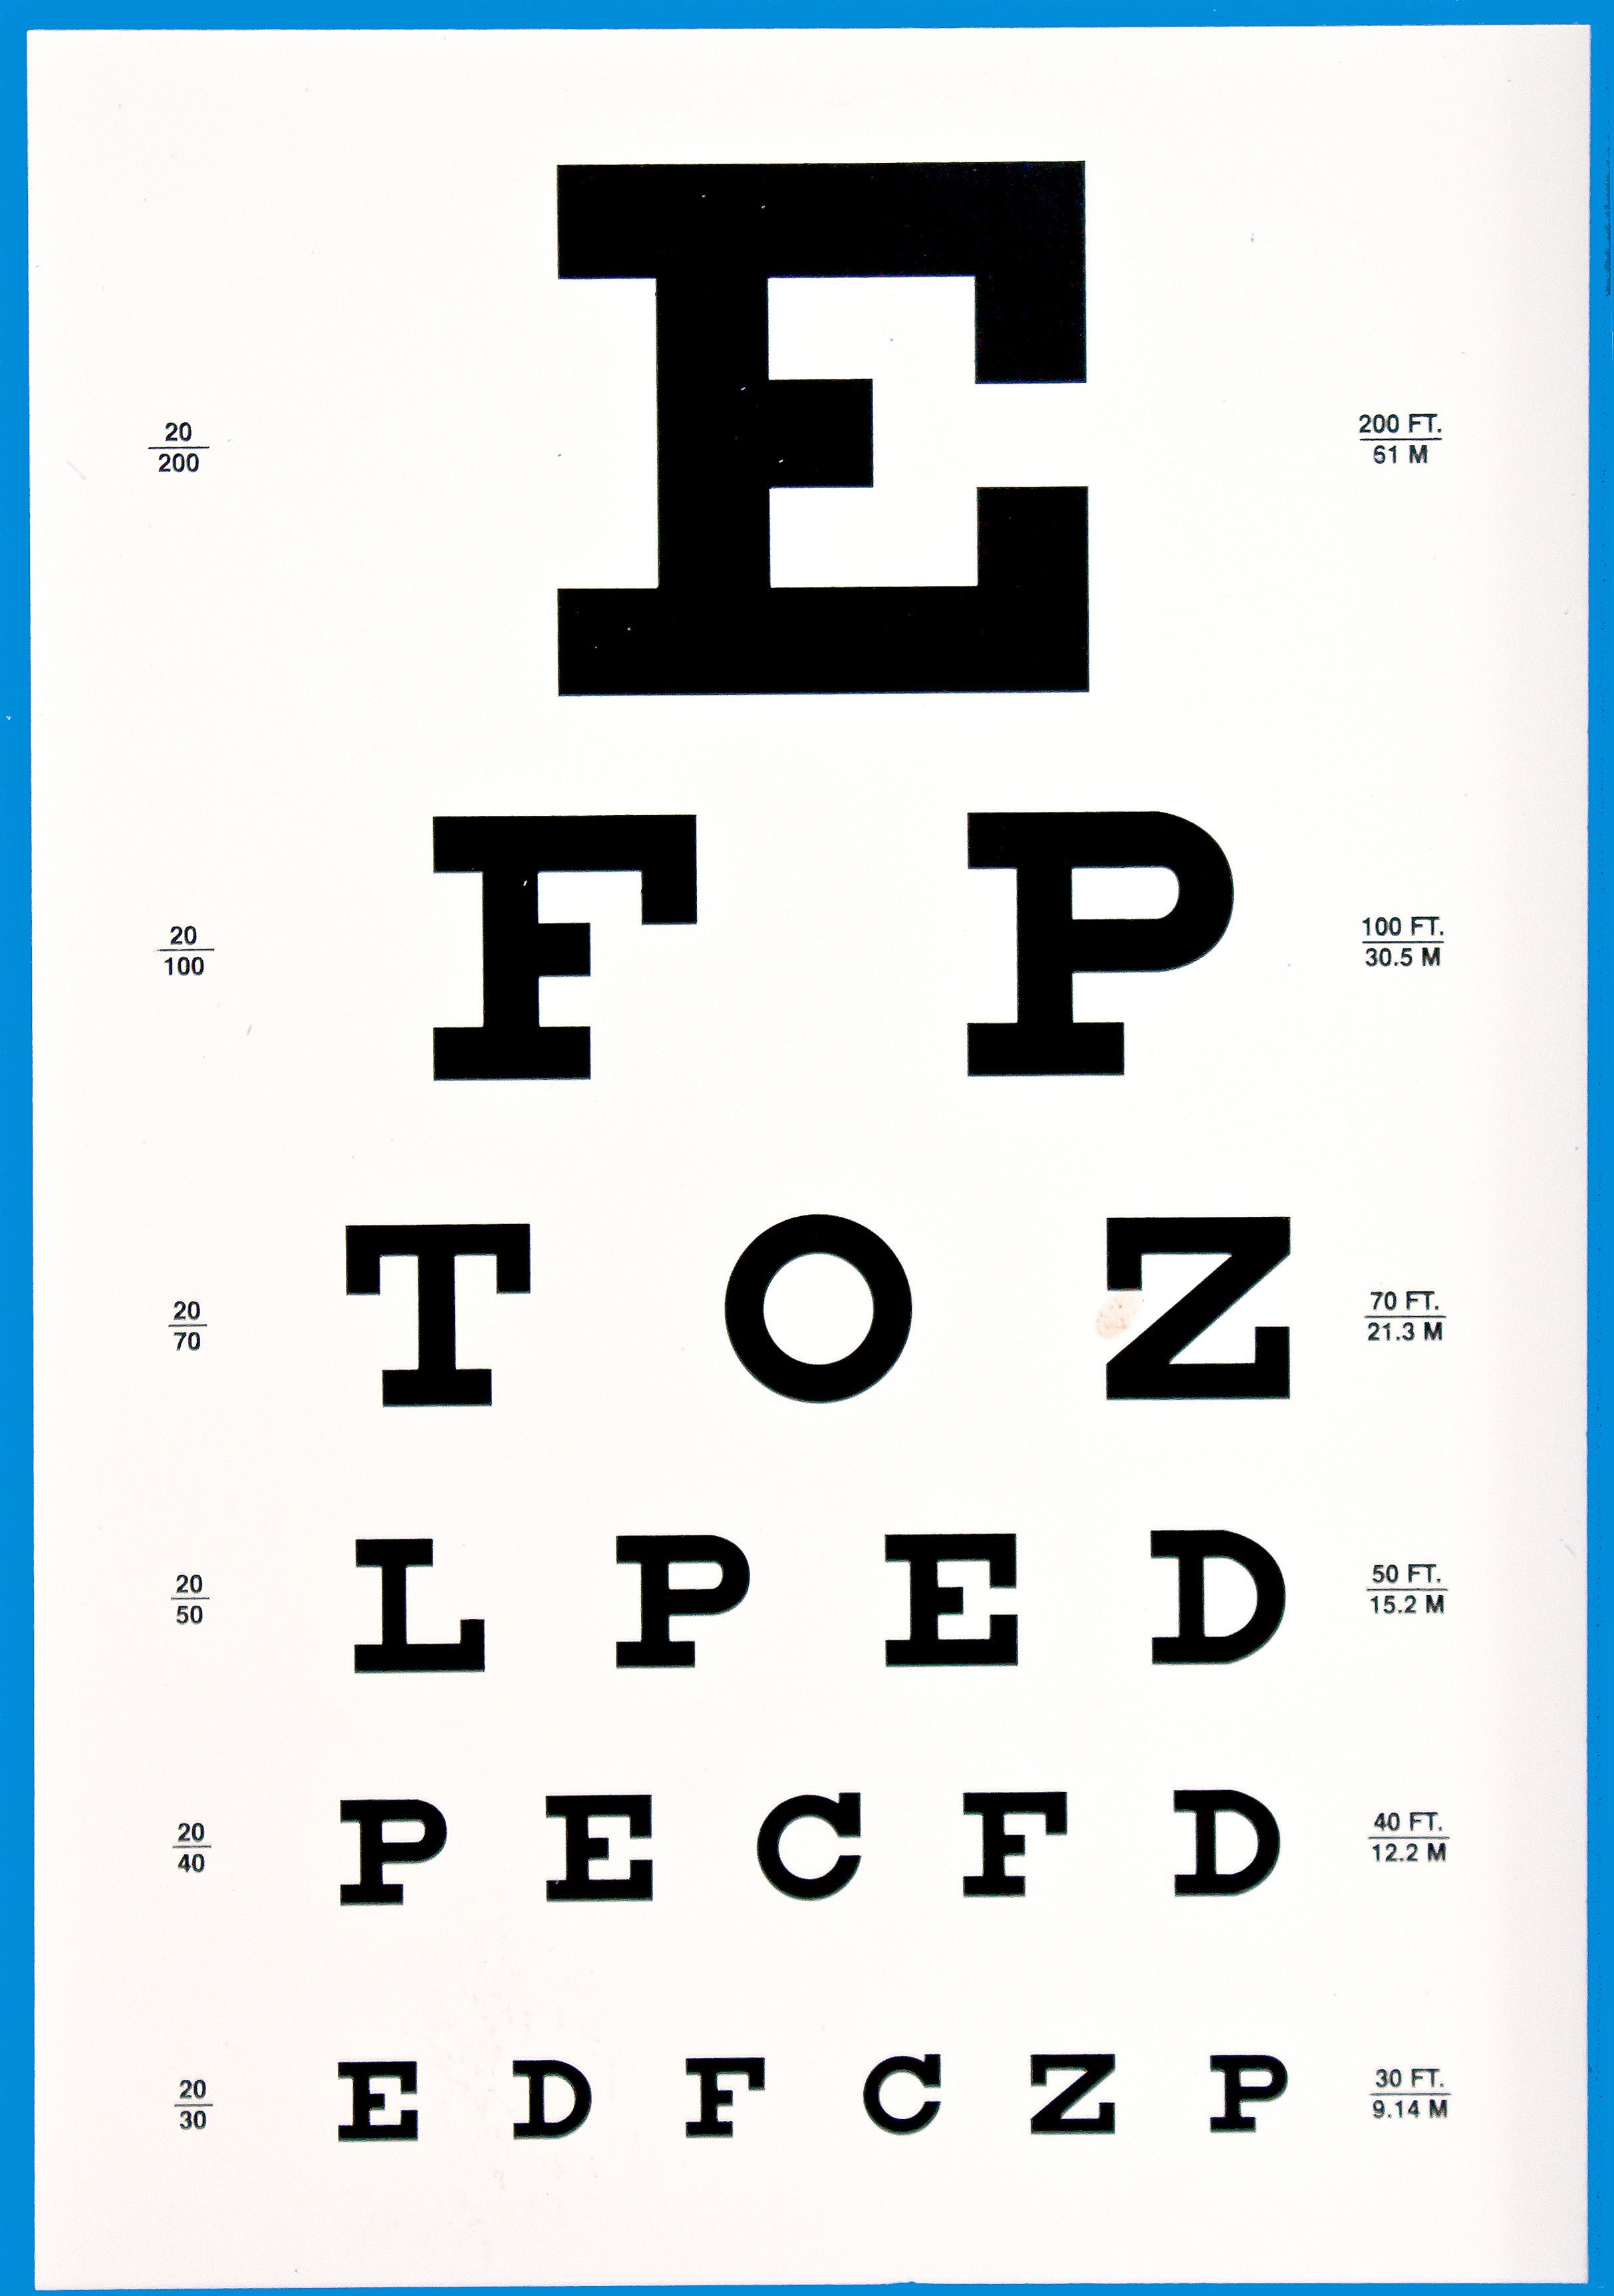 printable-snellen-eye-charts-disabled-world-is-there-lasik-after-age